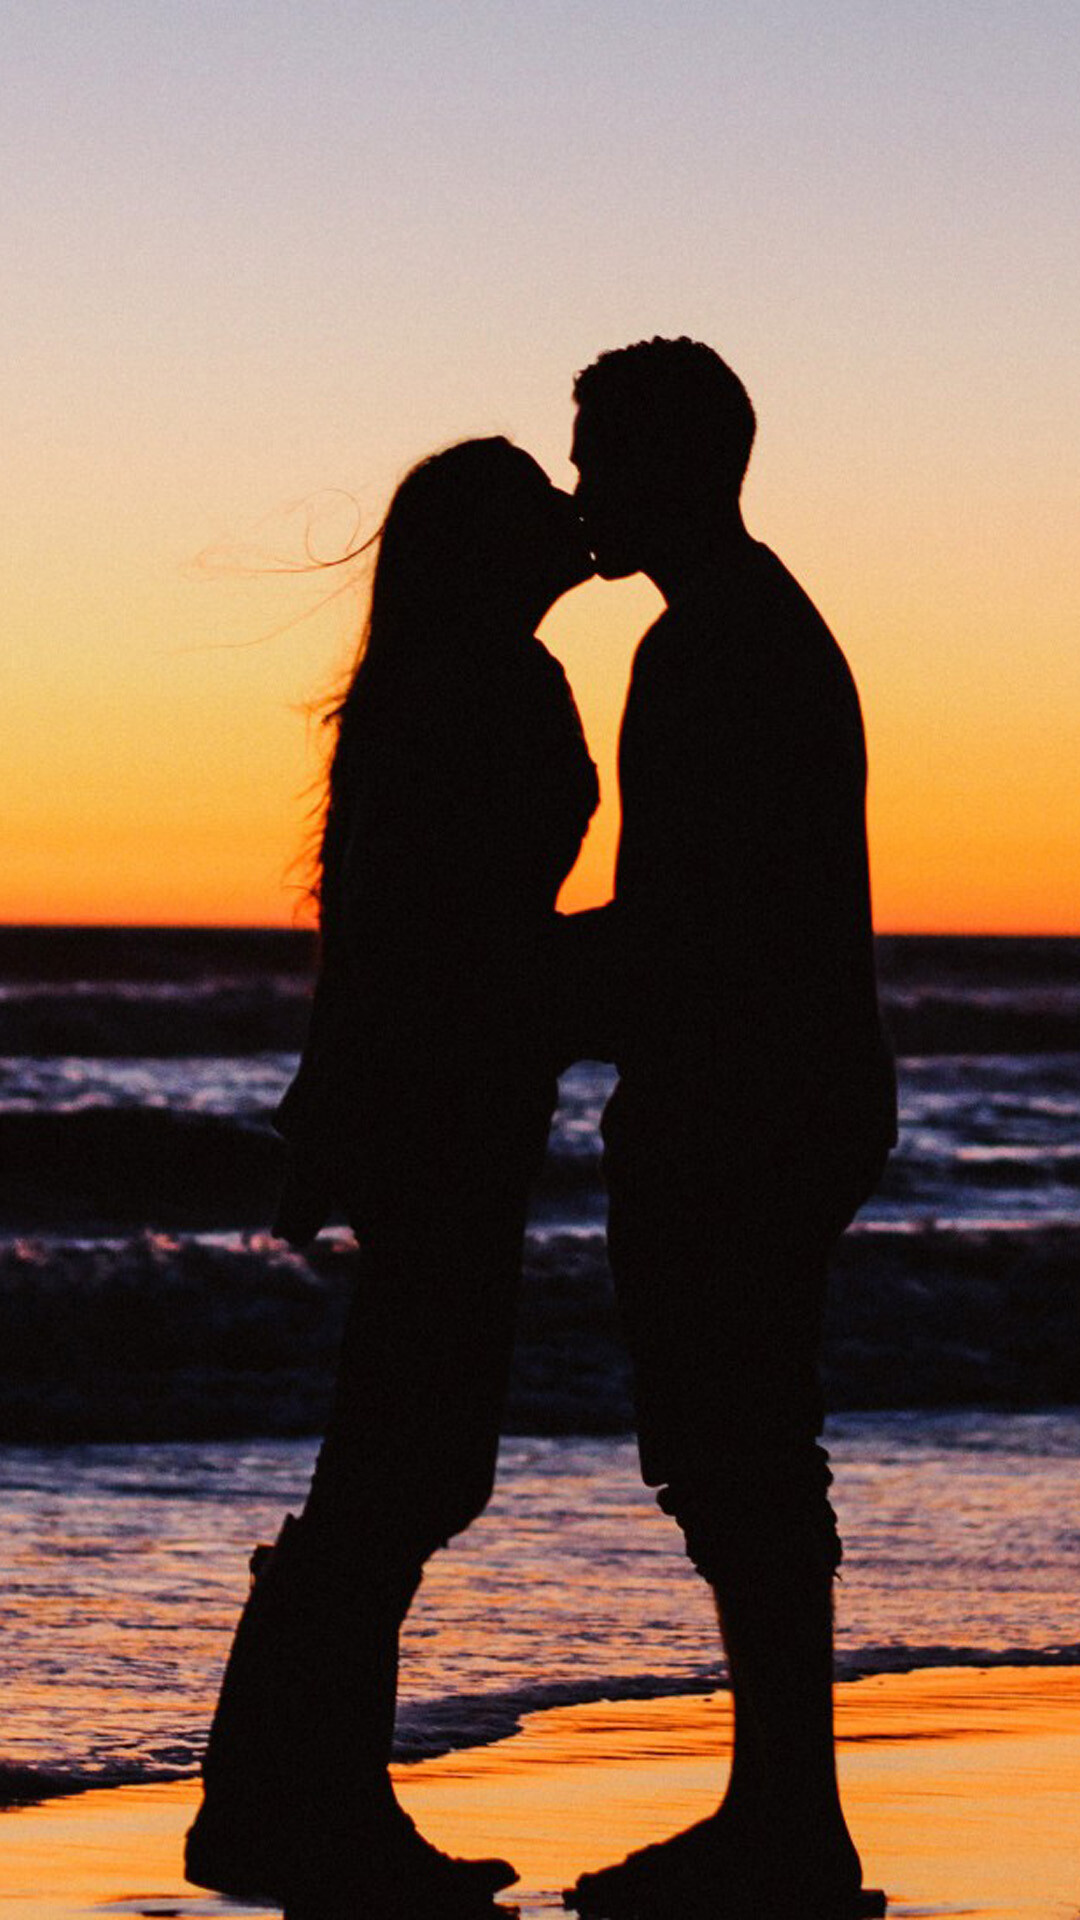 Kiss: Couple, Lovers kissing at the beach, Sunset. 1080x1920 Full HD Wallpaper.